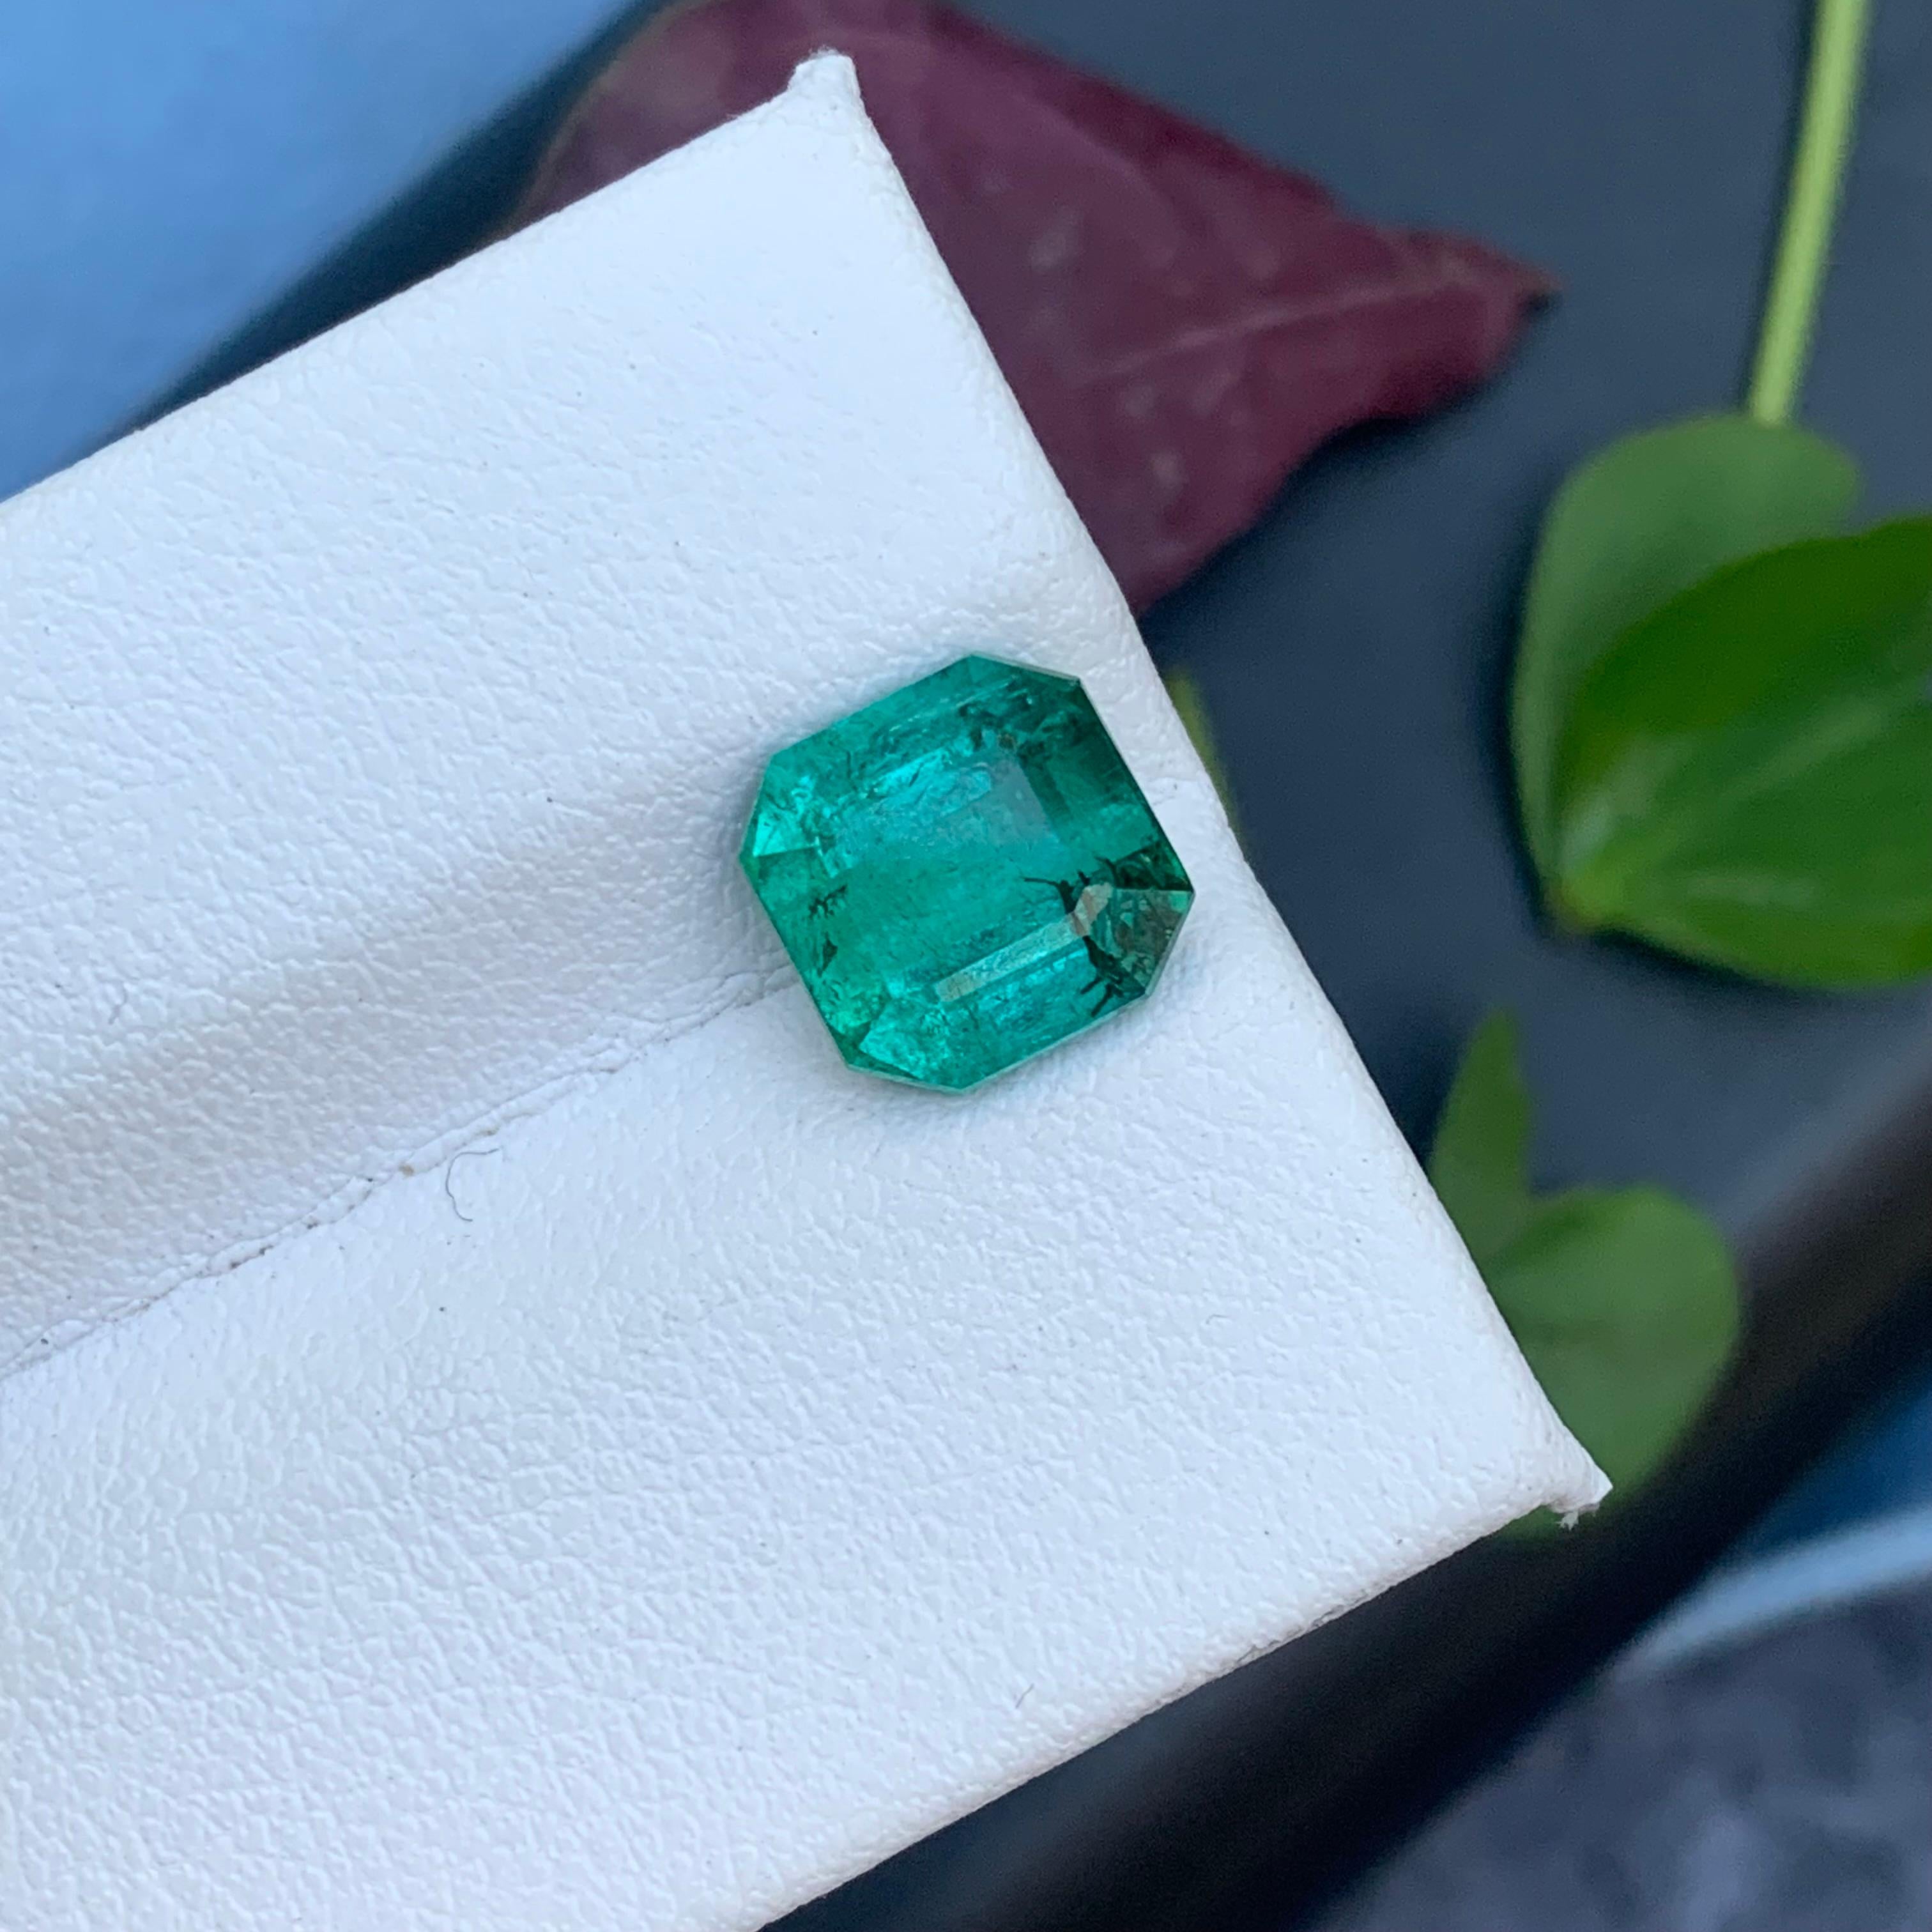 Gemstone Type : Tourmaline
Weight : 3.05 Carats
Dimensions : 8.1x8.1x5.6 Mm
Origin : Kunar Afghanistan
Clarity : Included
Shape: Octagon
Color: Seafoam
Certificate: On Demand
Basically, mint tourmalines are tourmalines with pastel hues of light